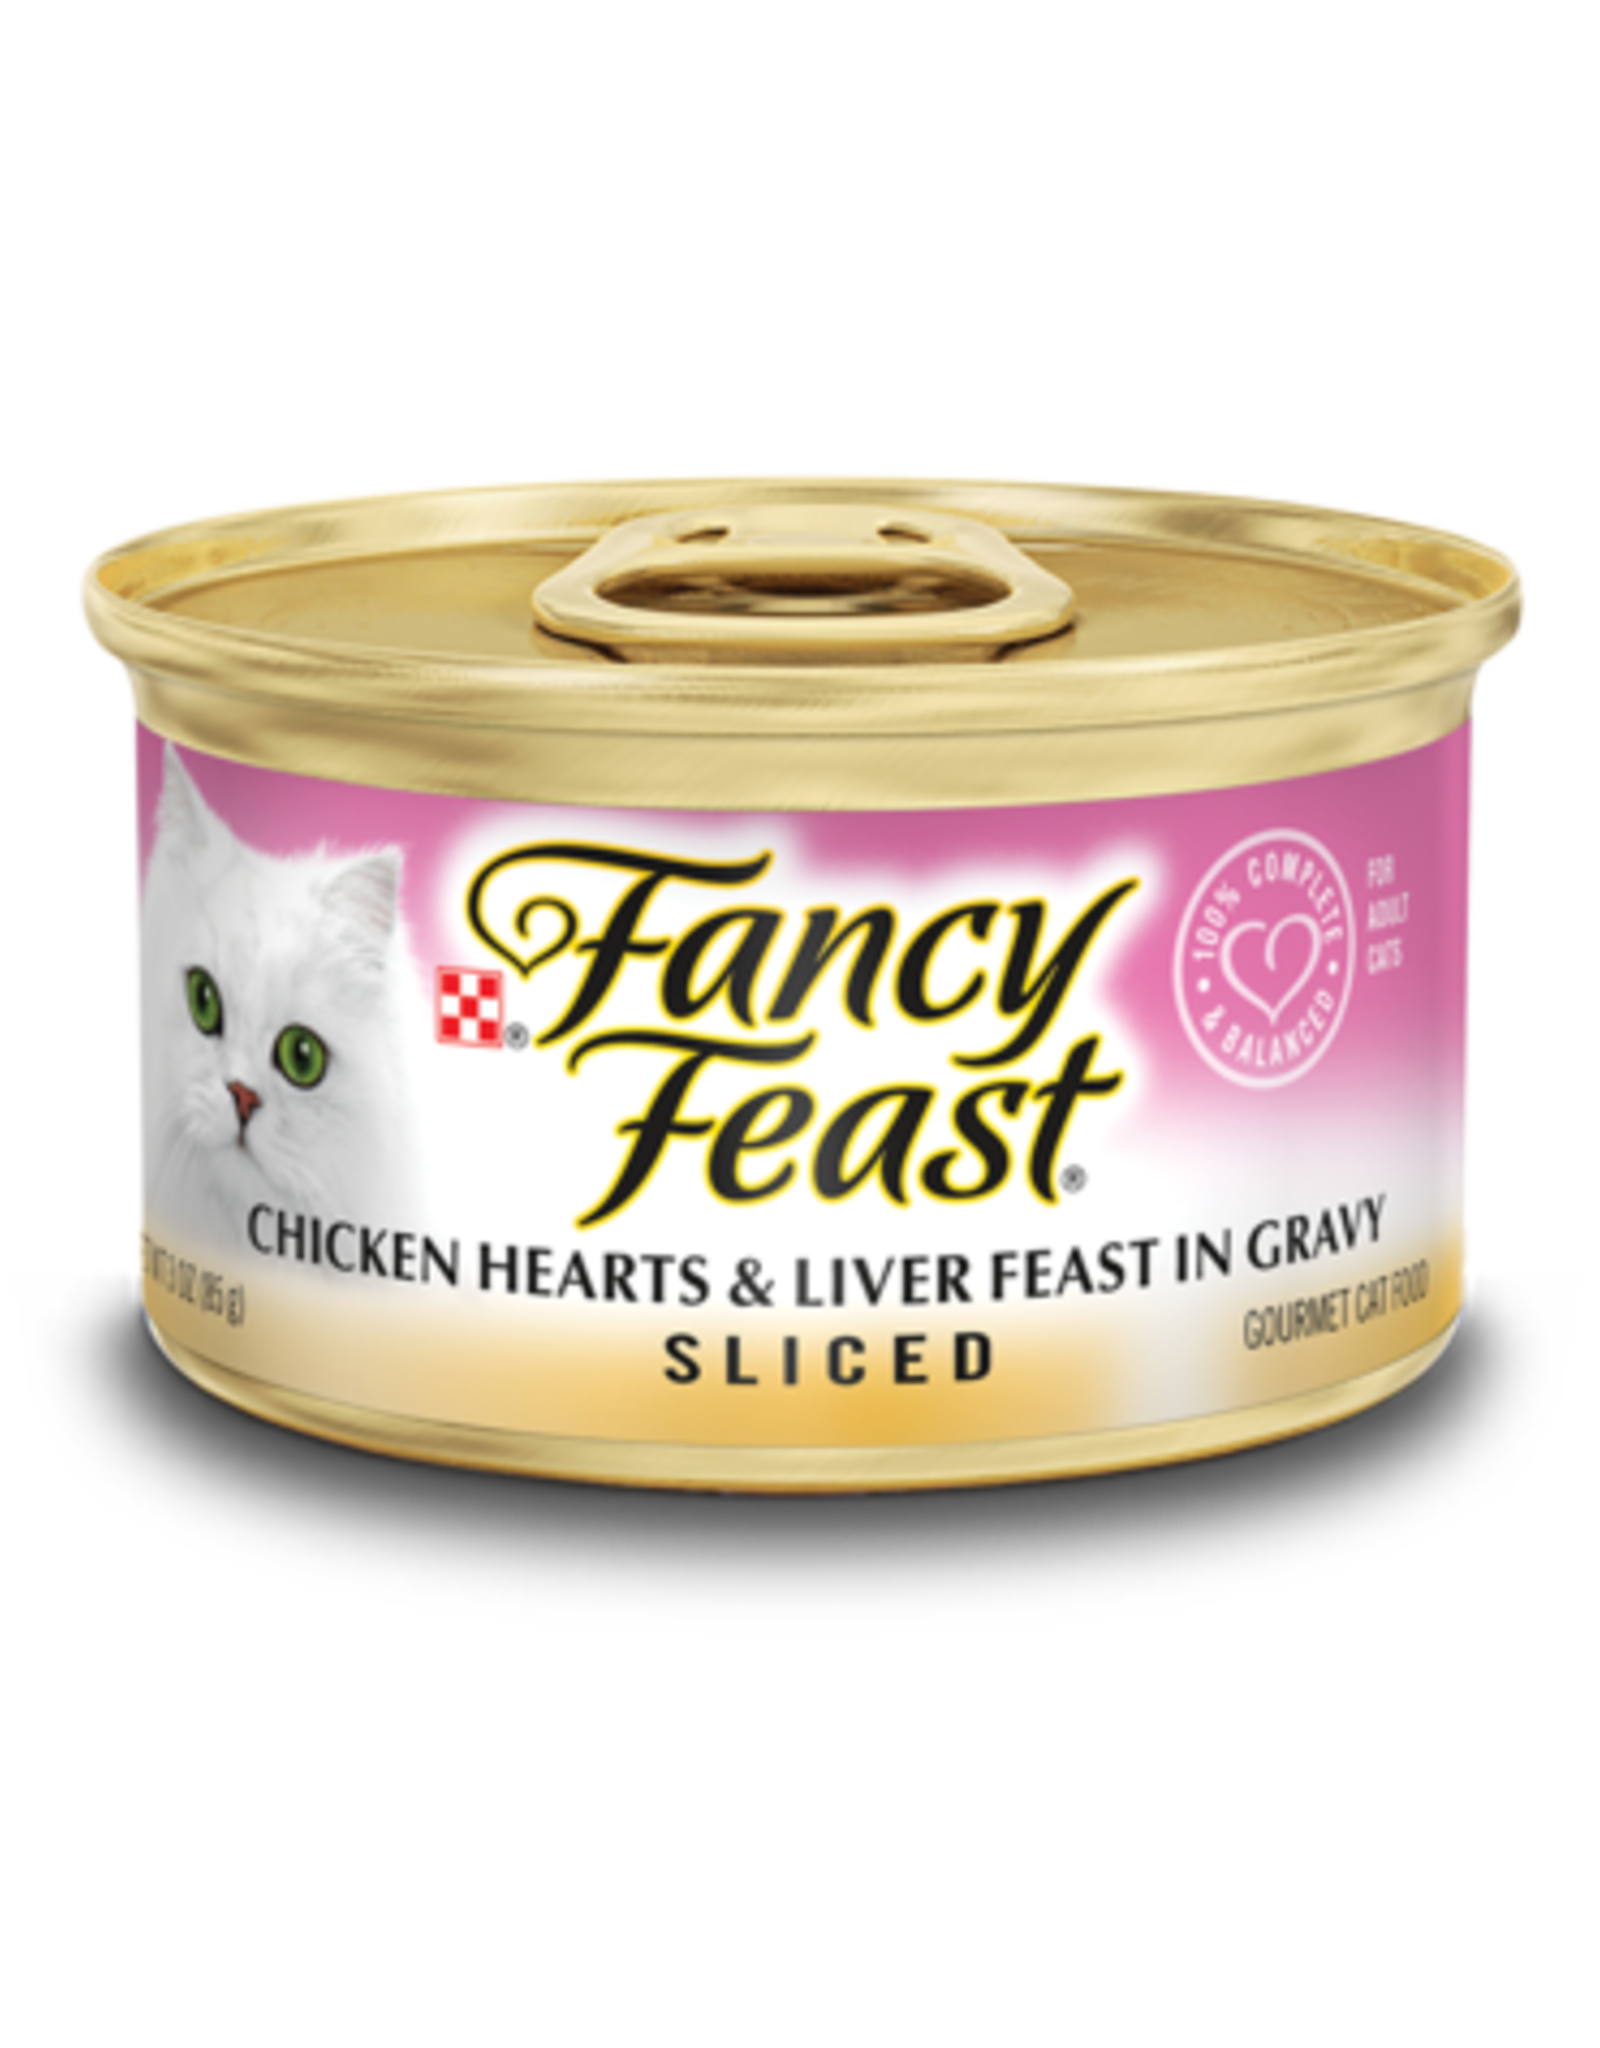 NESTLE PURINA PETCARE FANCY FEAST SLICED CHICKEN HEARTS & LIVER CASE OF 24